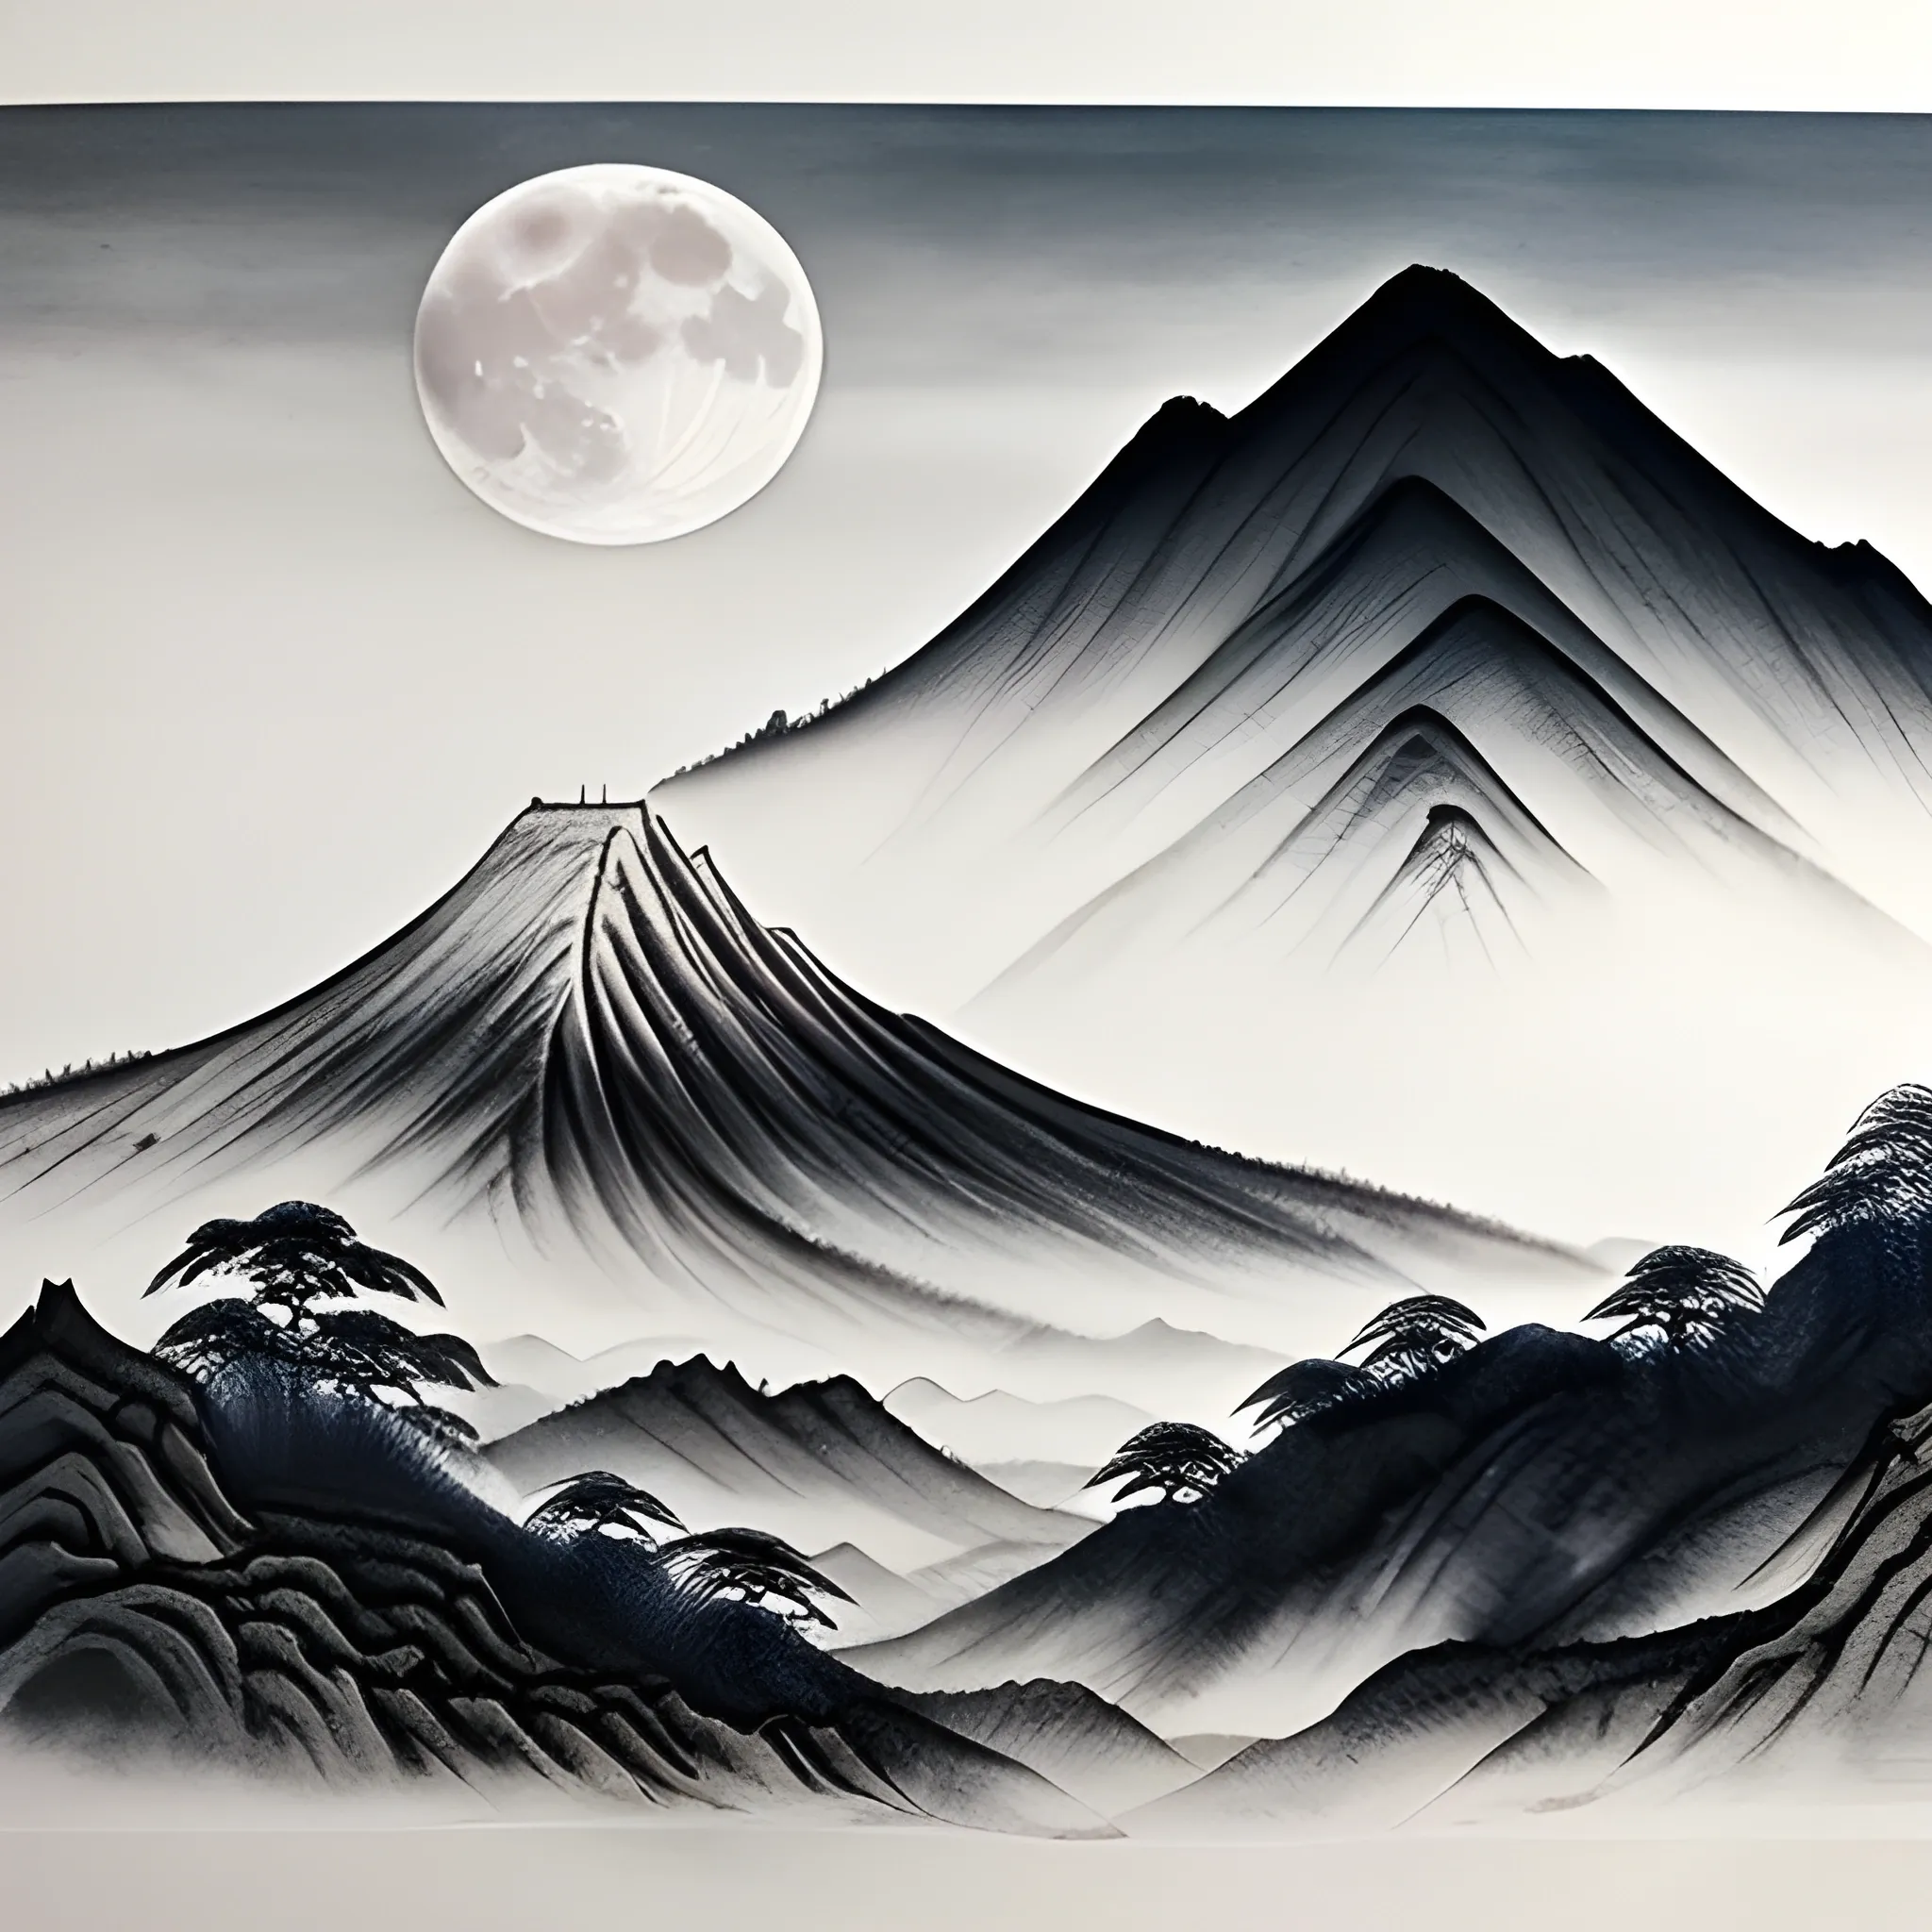 Produce a Shuǐ mò huà (Chinese ink wash painting) depicting multiple layers of mist-covered mountains, with the largest moon visible on the right side of the composition. Additionally, include a tiny temple situated atop one of the mountains for added detail and depth.